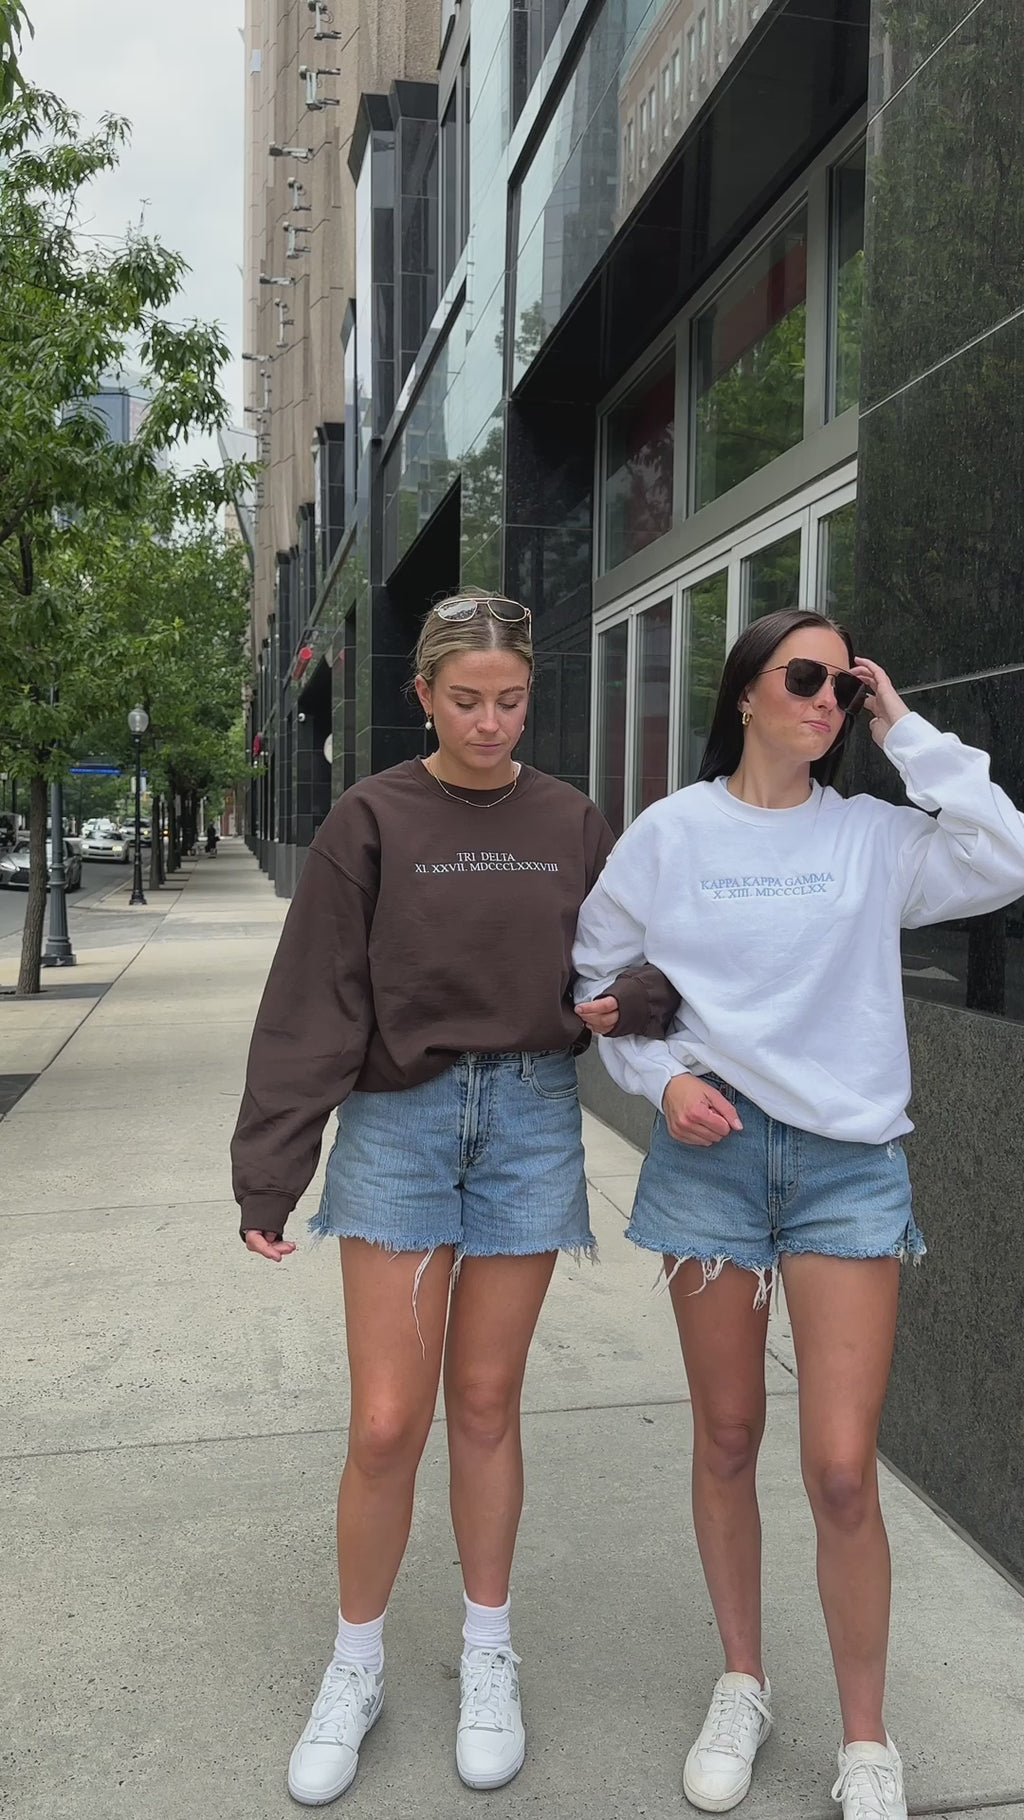 Timelessly True Embroidered Gildan Crew Neck Sorority Sweatshirt styled with two models in the uptown, city location